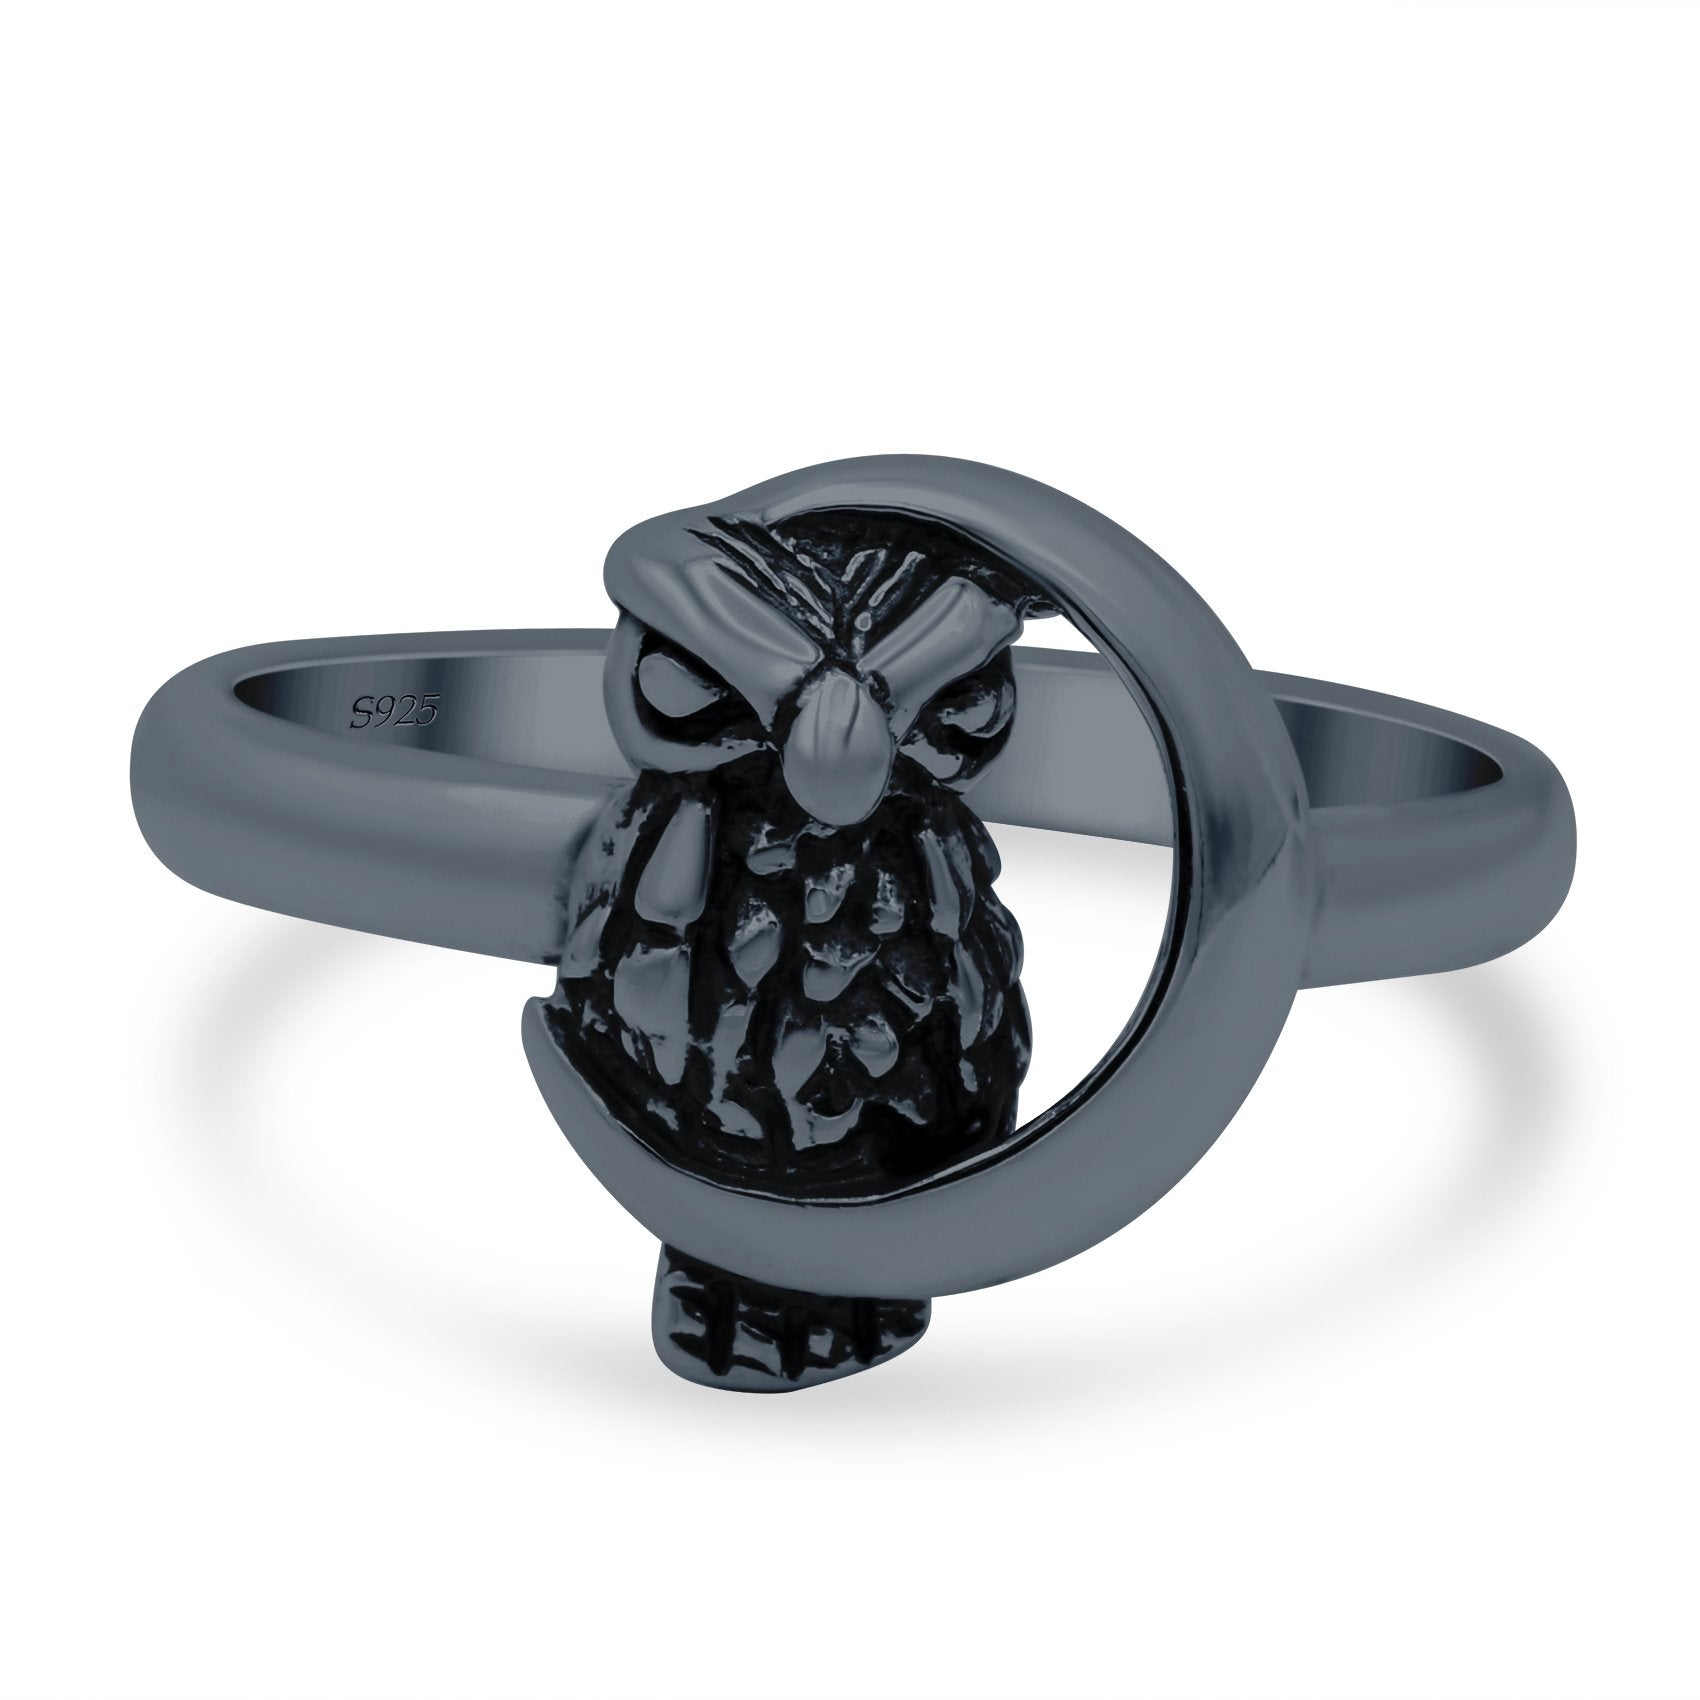 Moon and Owl Ring Oxidized Band Solid 925 Sterling Silver Thumb Ring (13mm)